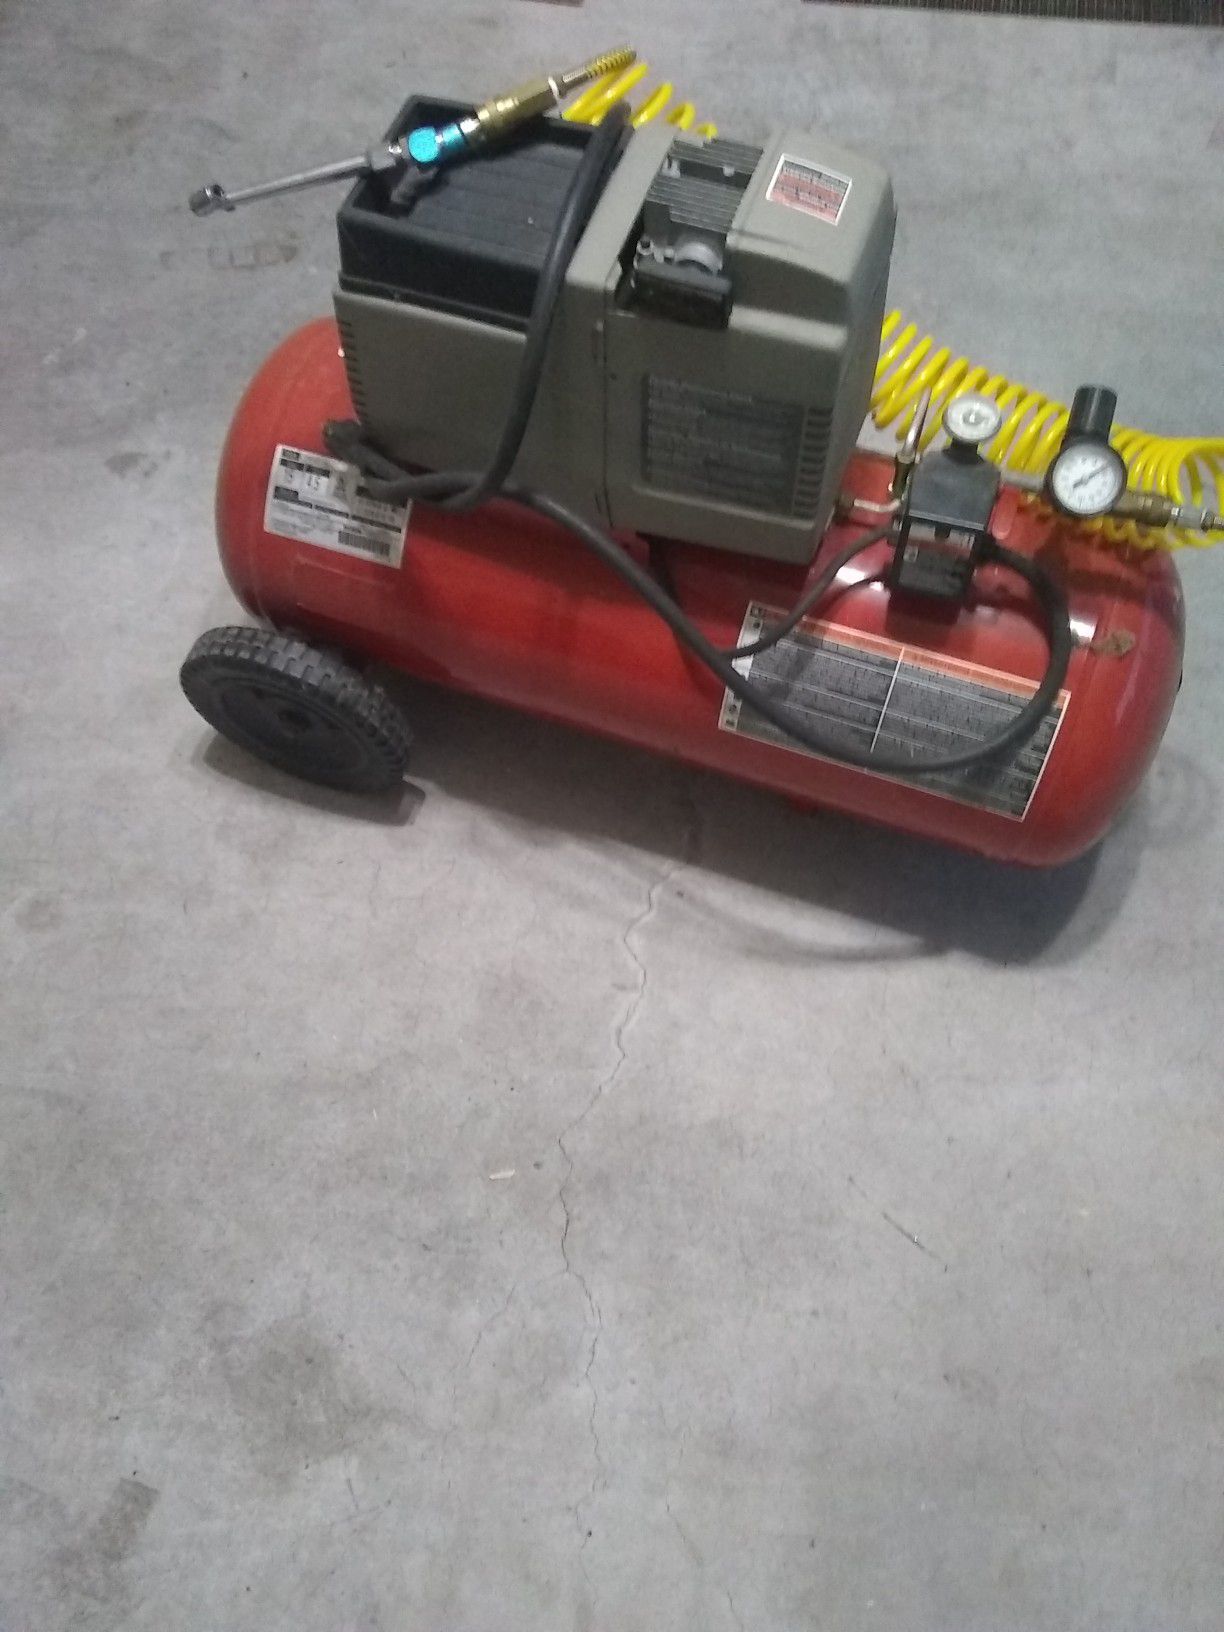 Air compressor 135 PSI with air tools and accessories